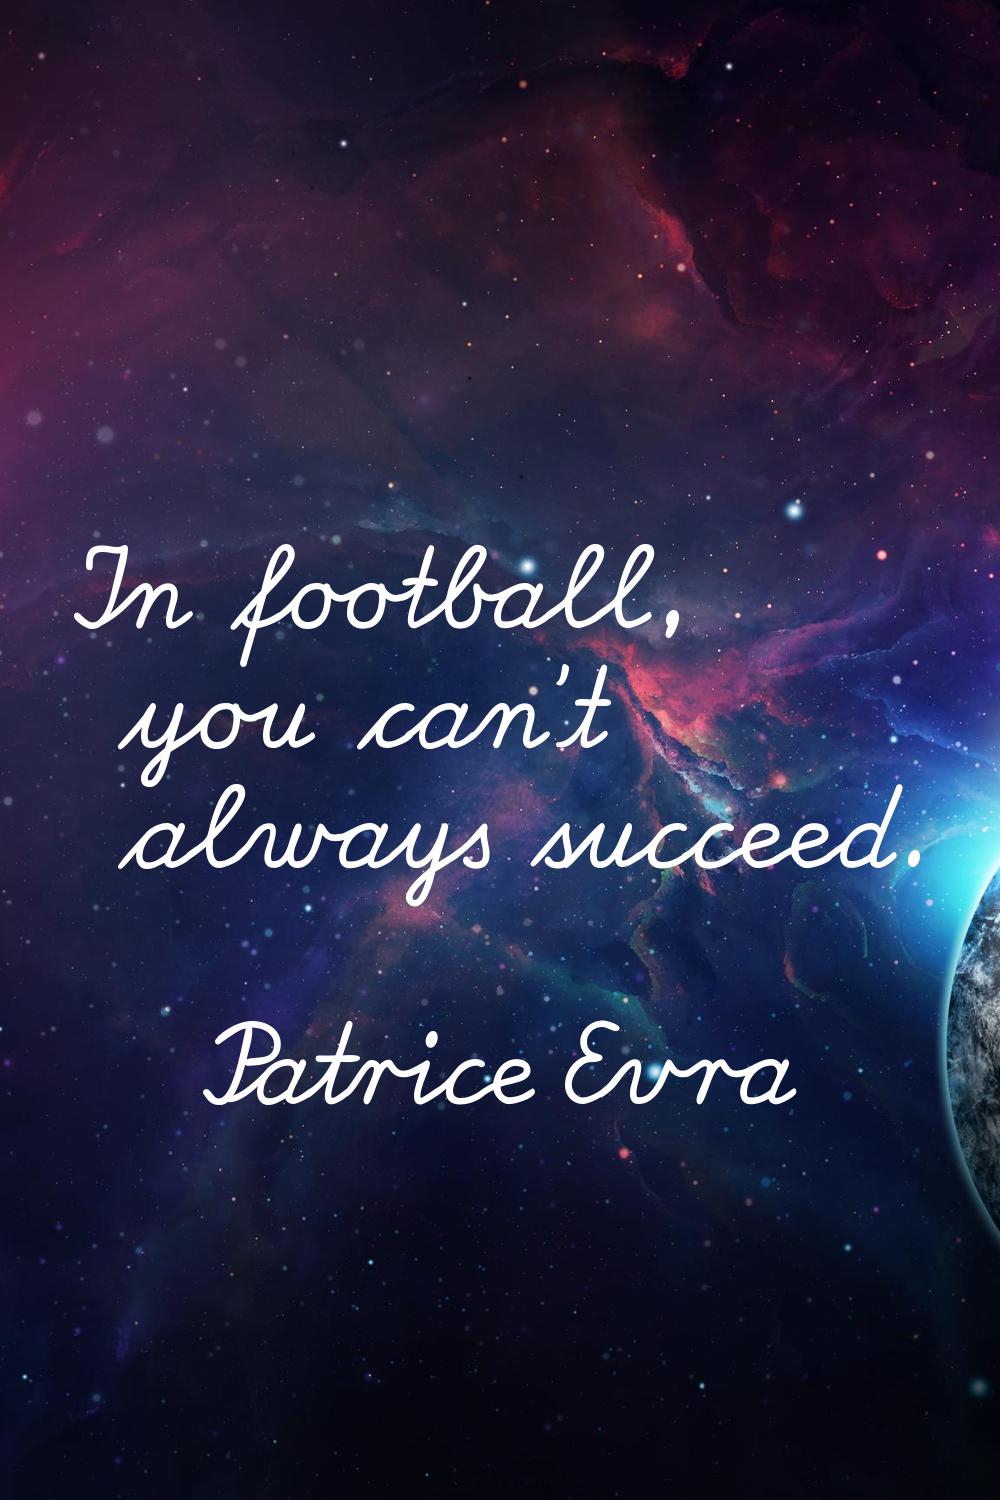 In football, you can't always succeed.